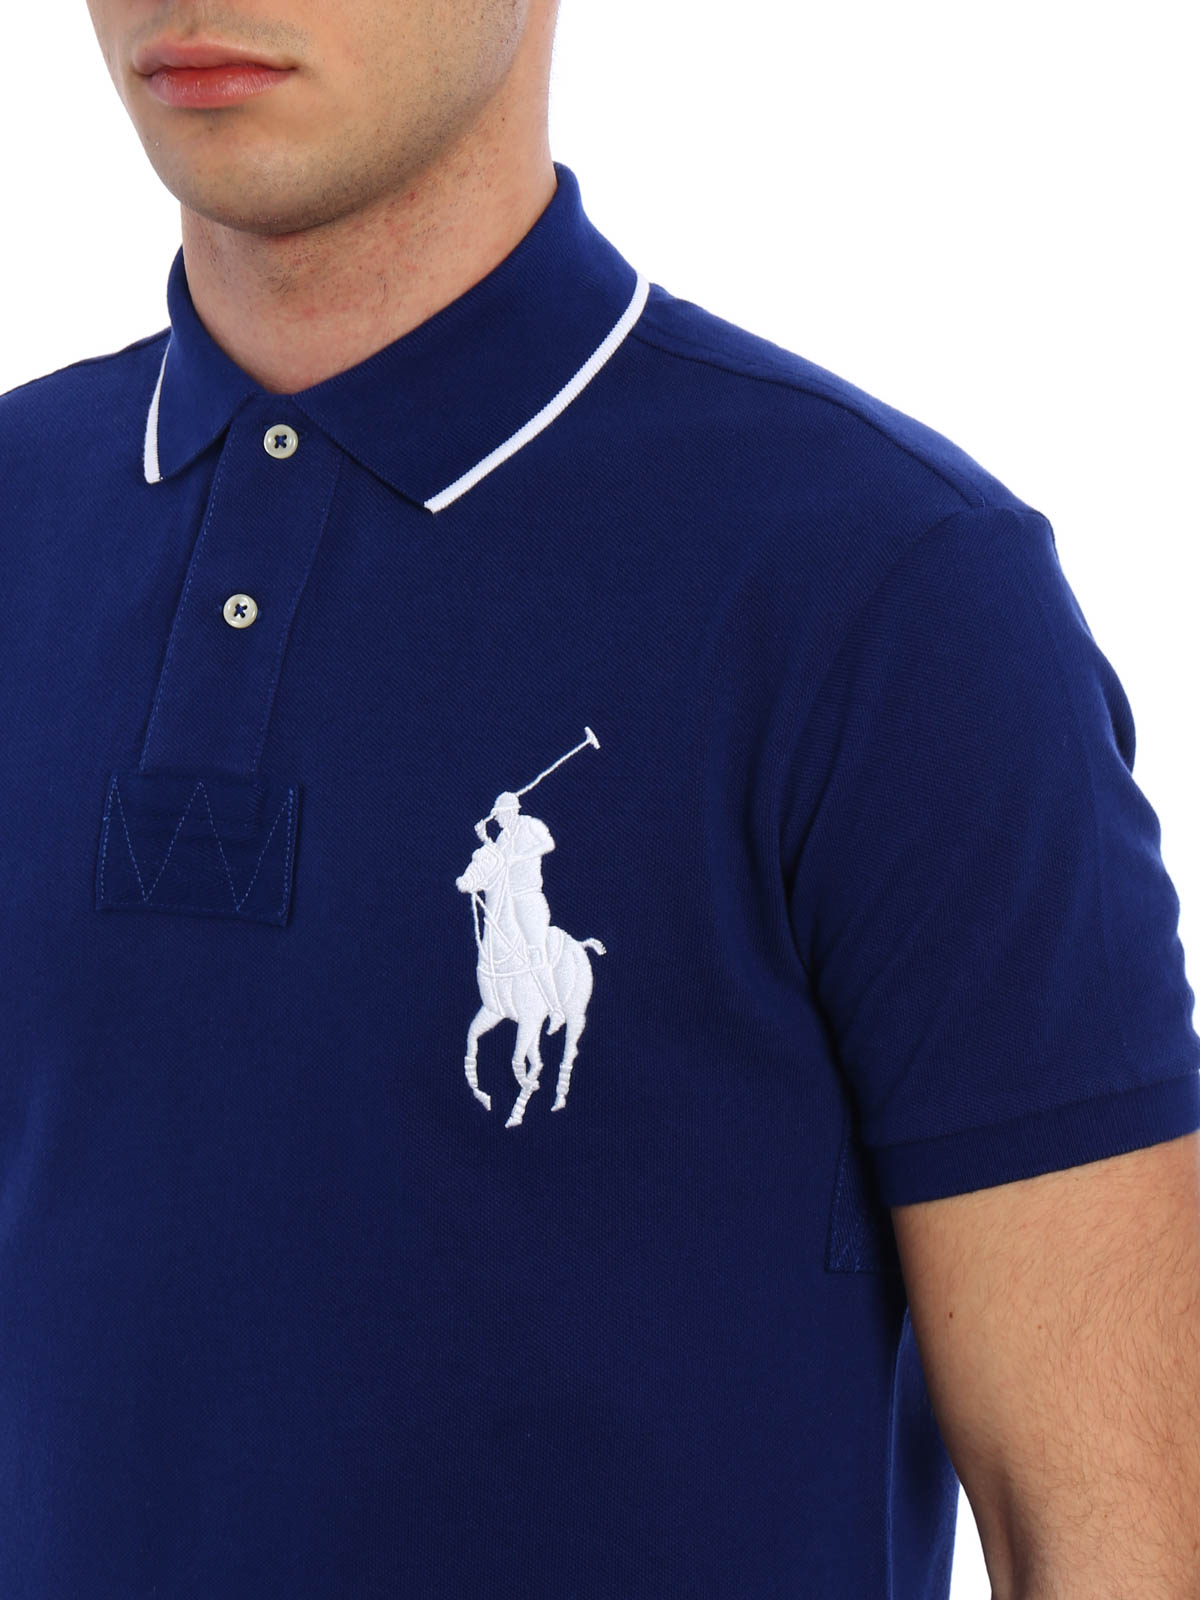 embroidered ralph lauren polo shirts